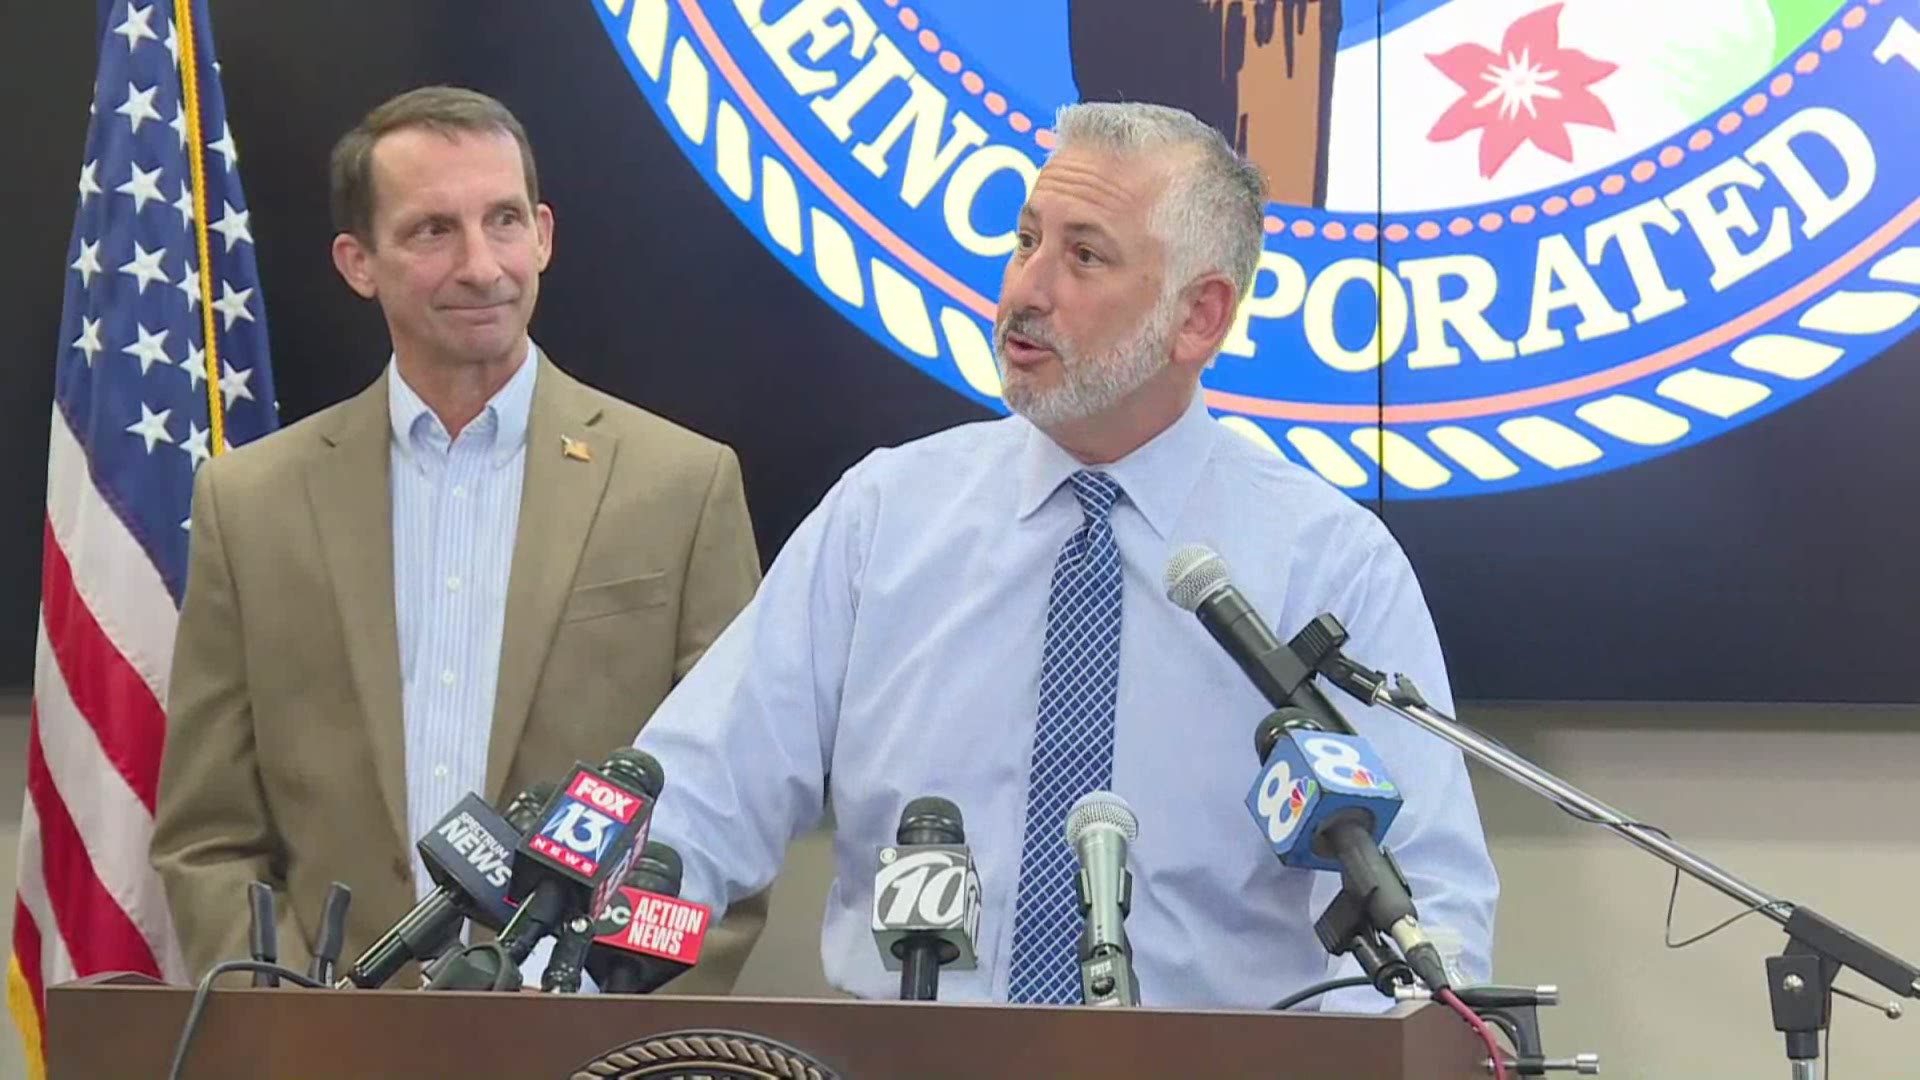 St. Petersburg Mayor Rick Kriseman says the plan for the Tampa Bay Rays to split their season with Montreal is a nonstarter because he won't agree to it.